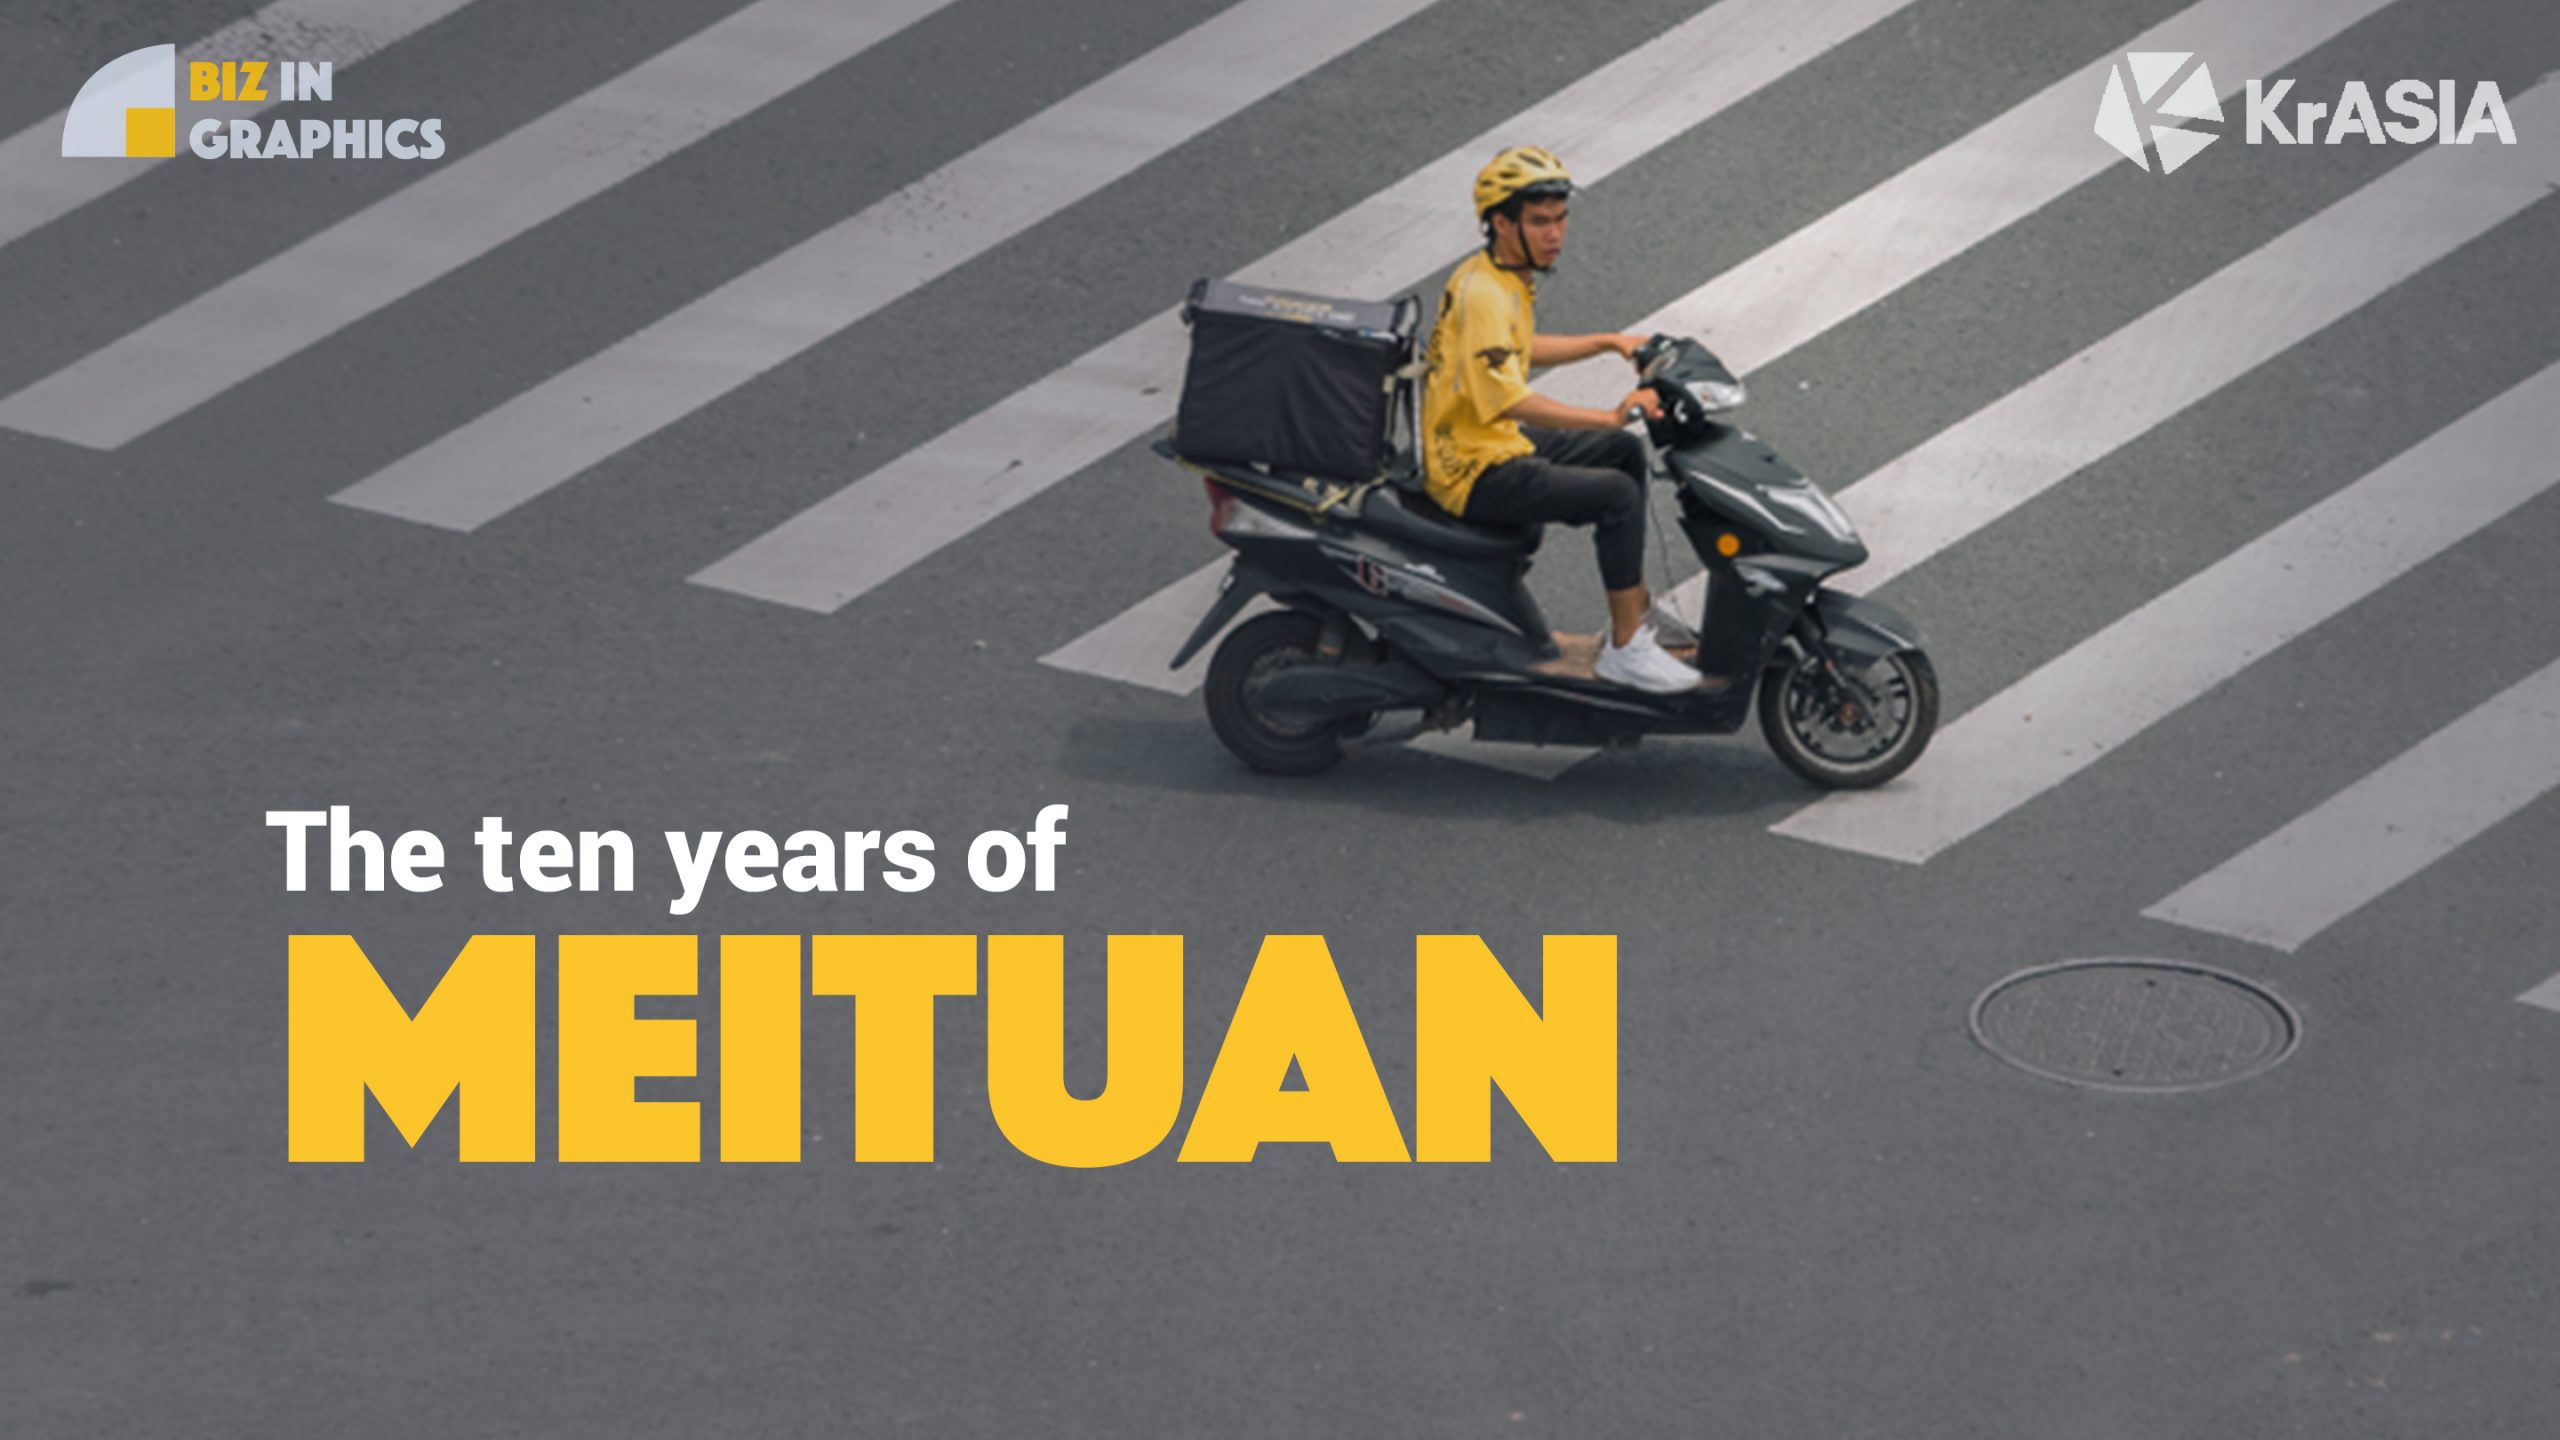 BIZ IN GRAPHICS | Meituan, from China’s Groupon mimicry to local service giant in 10 years